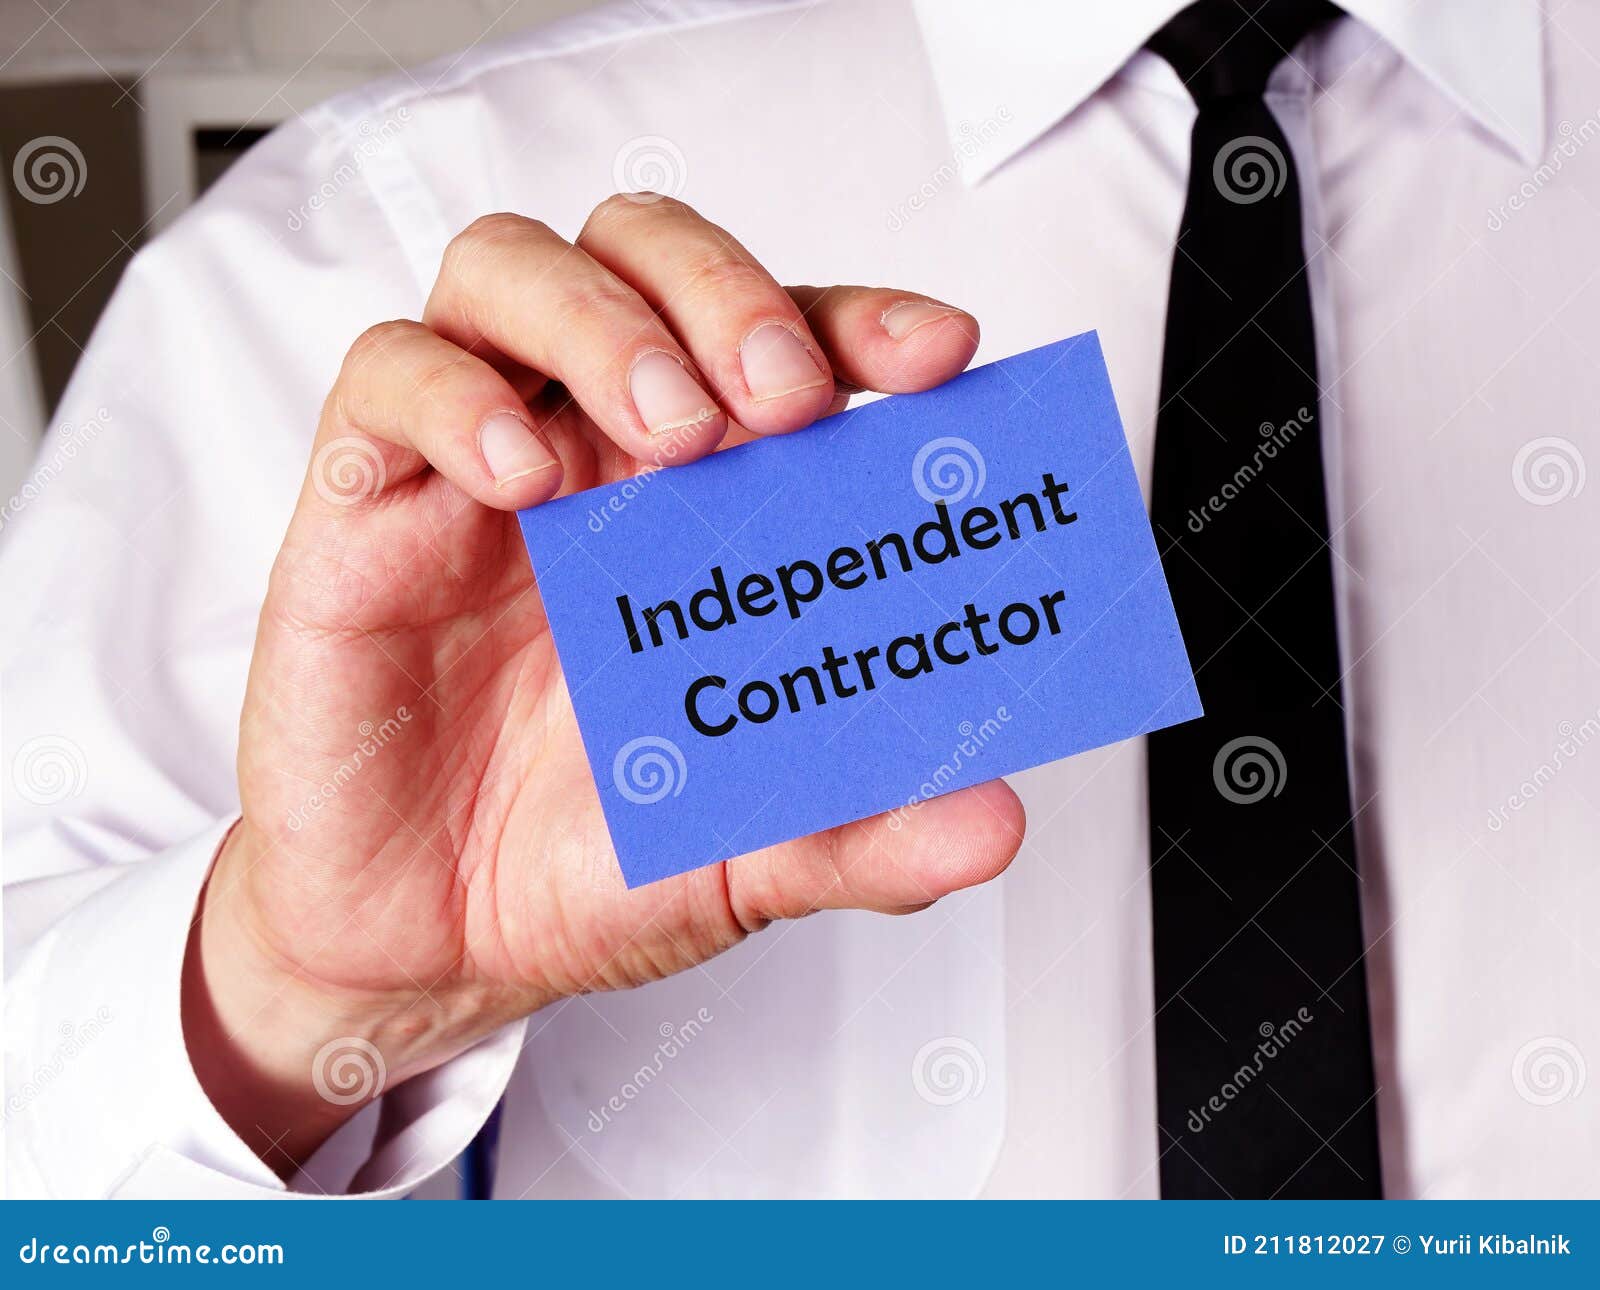 financial concept about independent contractor with phrase on the page